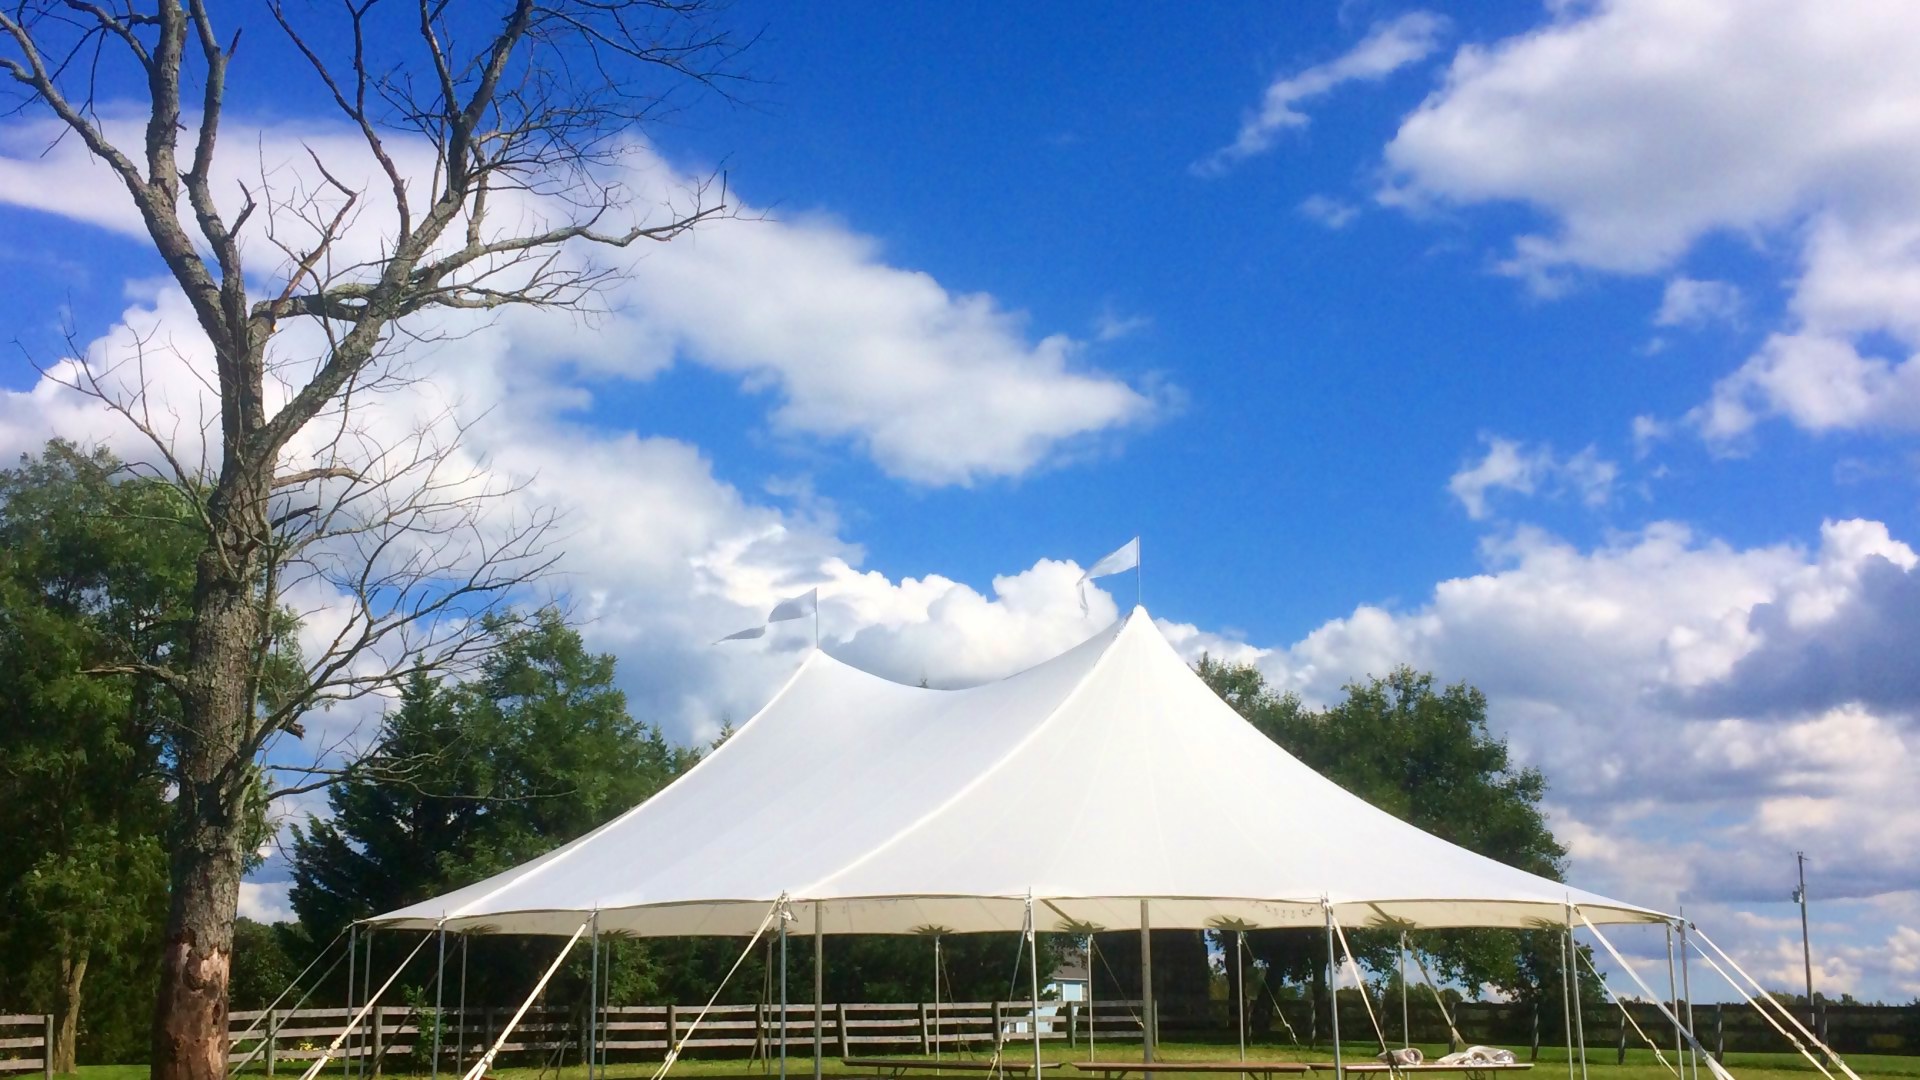 Beautiful Sailcloth for rent in Easton, PA